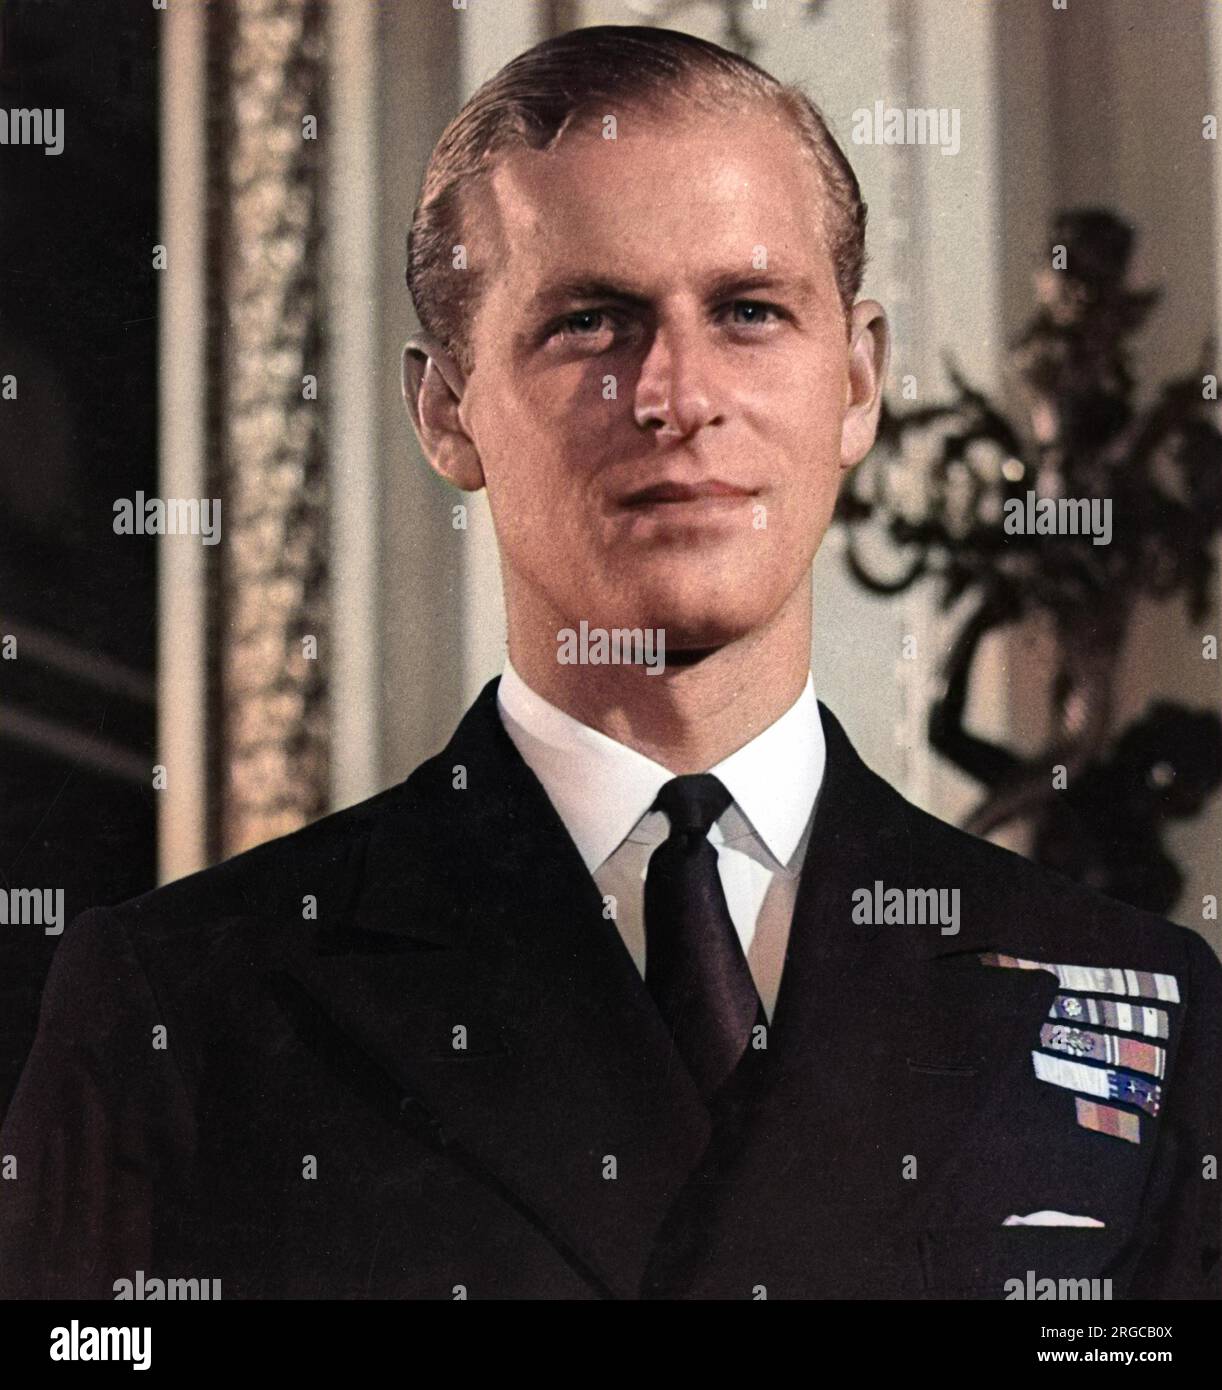 Lieutenant Philip Mountbatten, later Prince Philip, Duke of Edinburgh (born 1921) pictured at the time of his engagement to Princess Elizabeth. Stock Photo